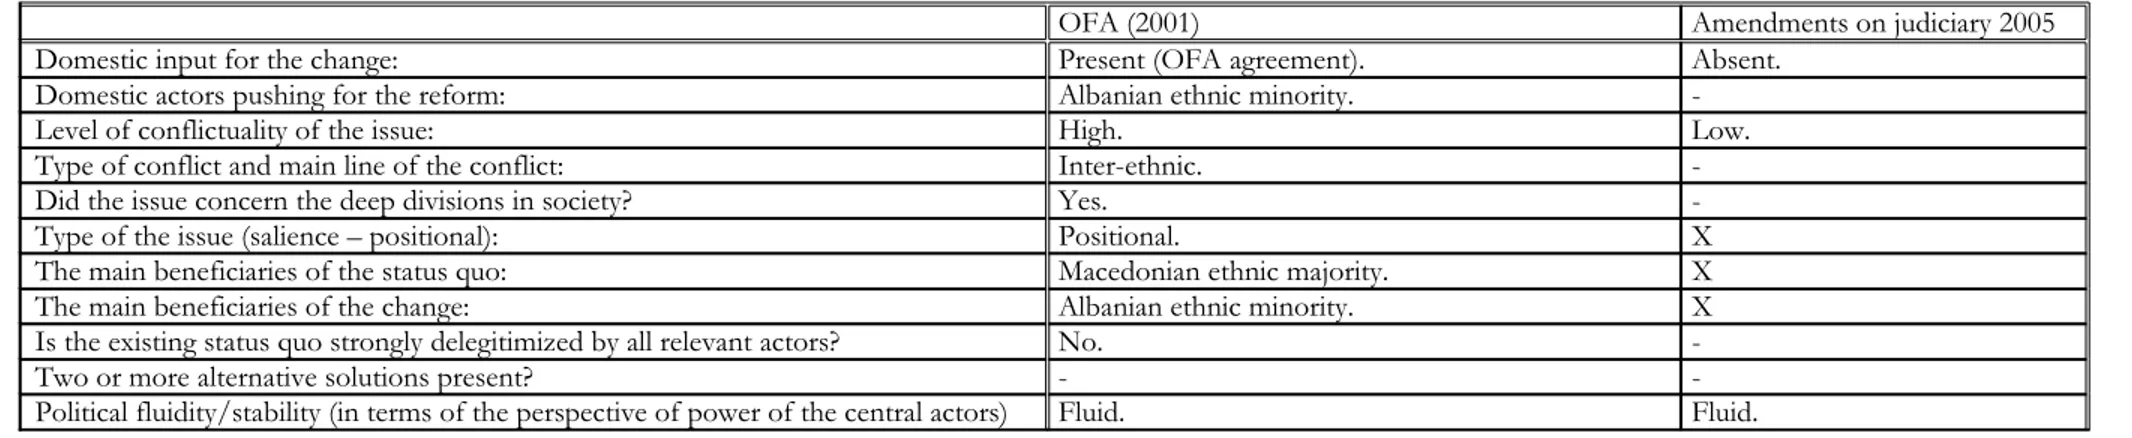 Table 8: “The constitutional amendments of 2001 and 2005 in Macedonia: outcomes”  (author's elaboration).